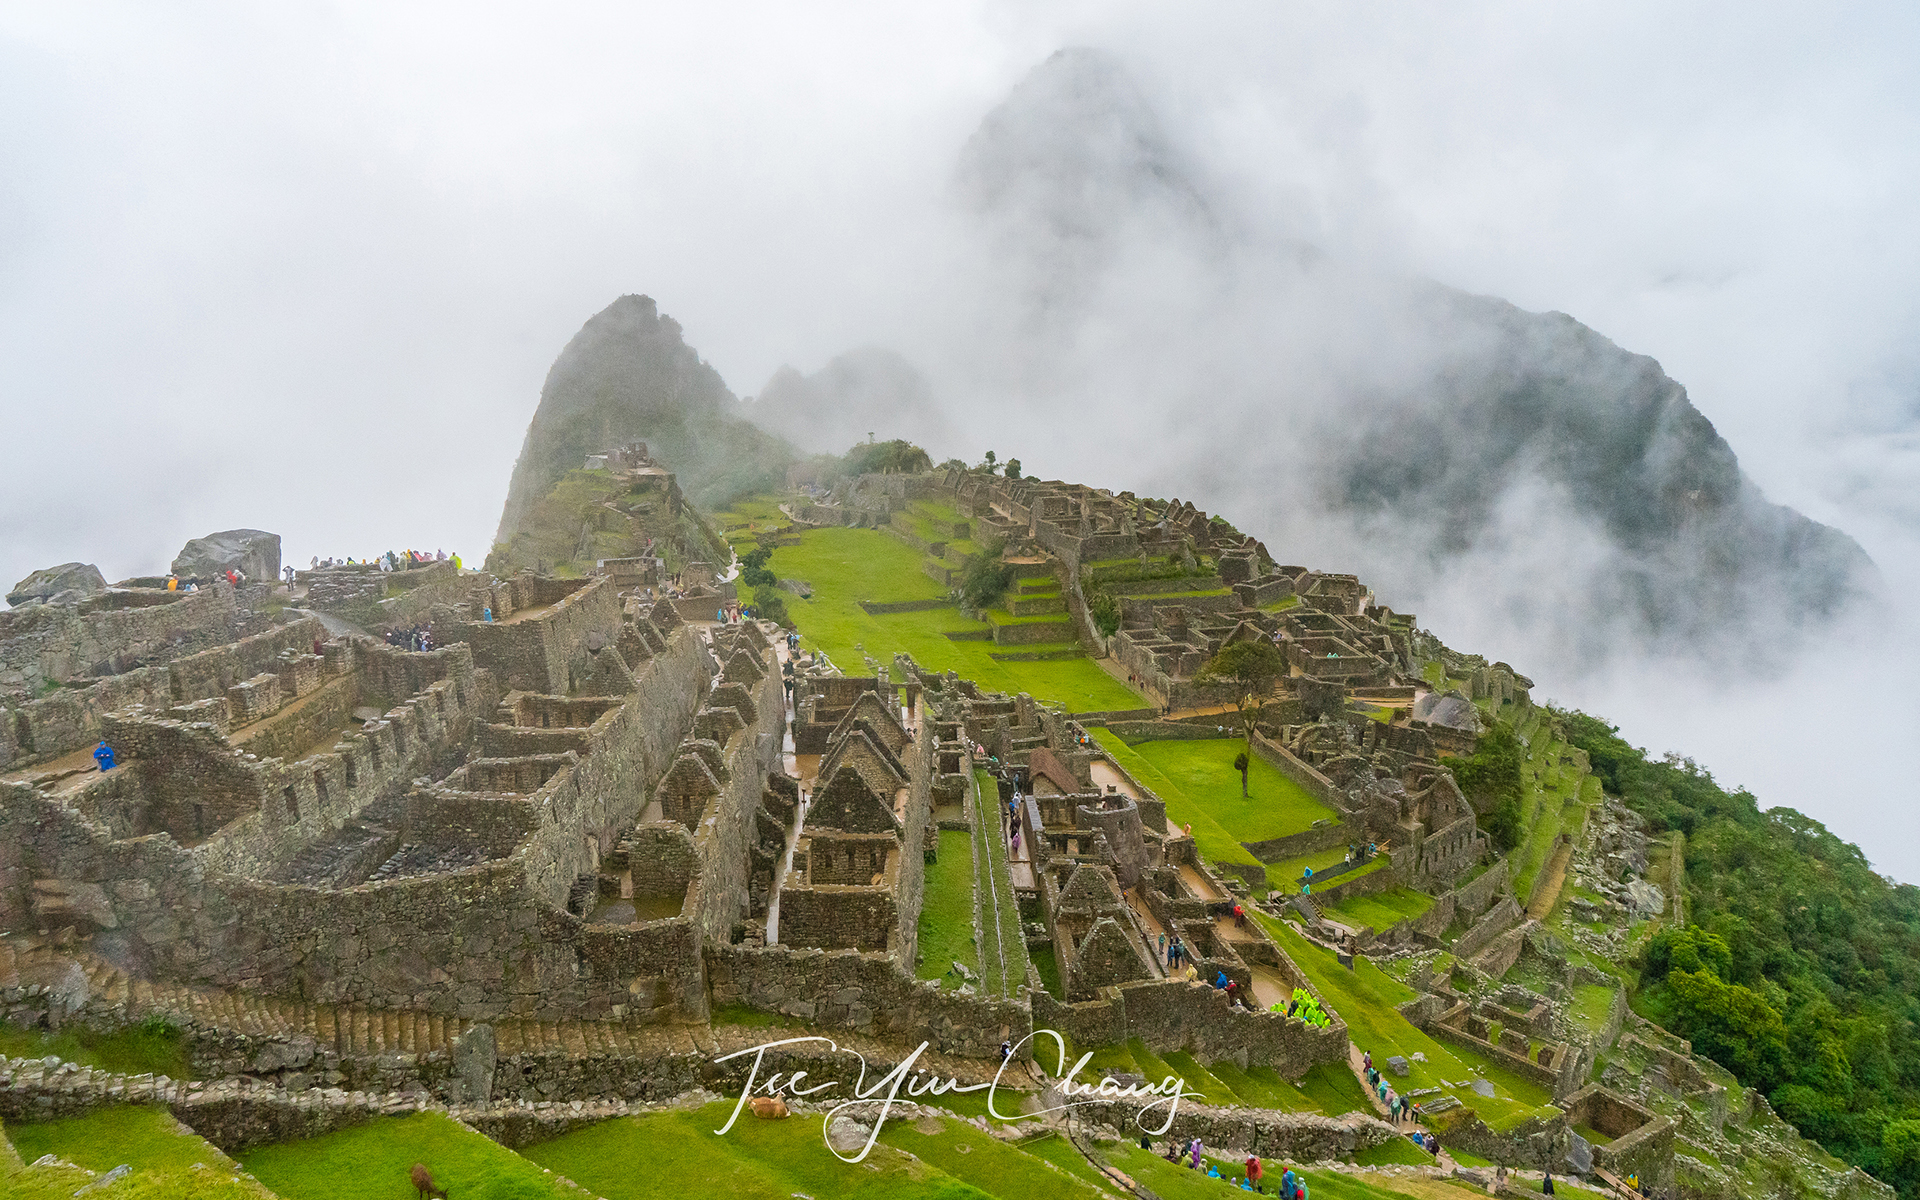 The famous shot of Machu Picchu, view of the main square from the city gate. Huayna Picchu is hidden behind the cloud